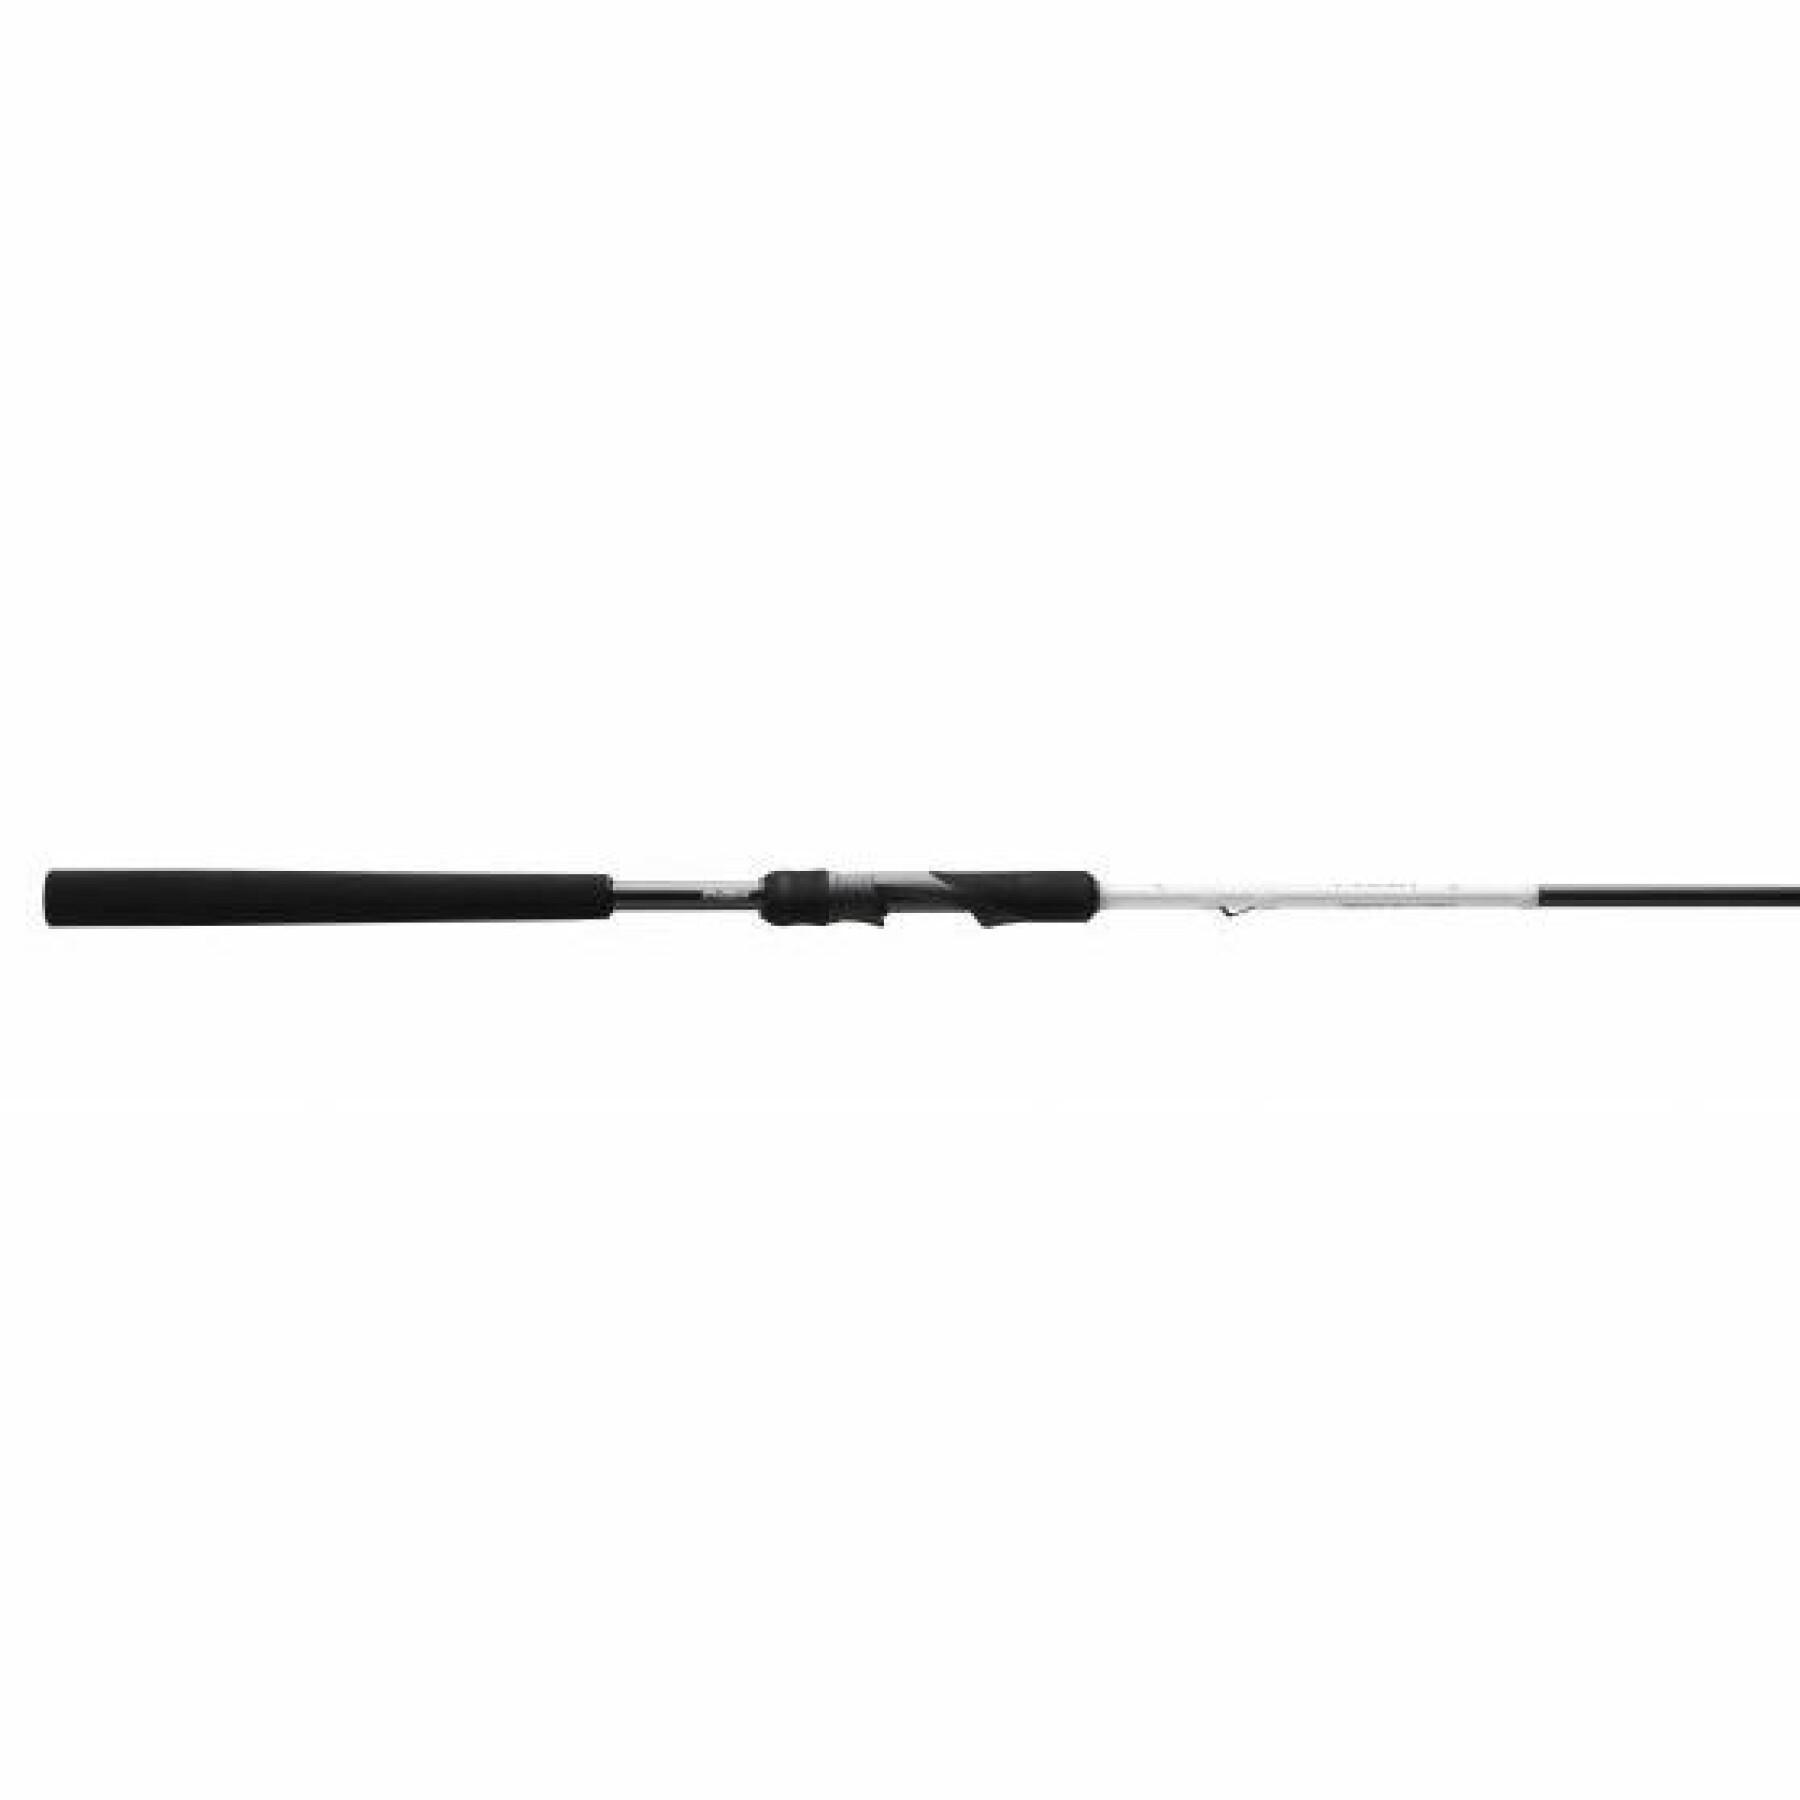 Trzcina 13 Fishing Rely S Spin 2,69m 15-40g